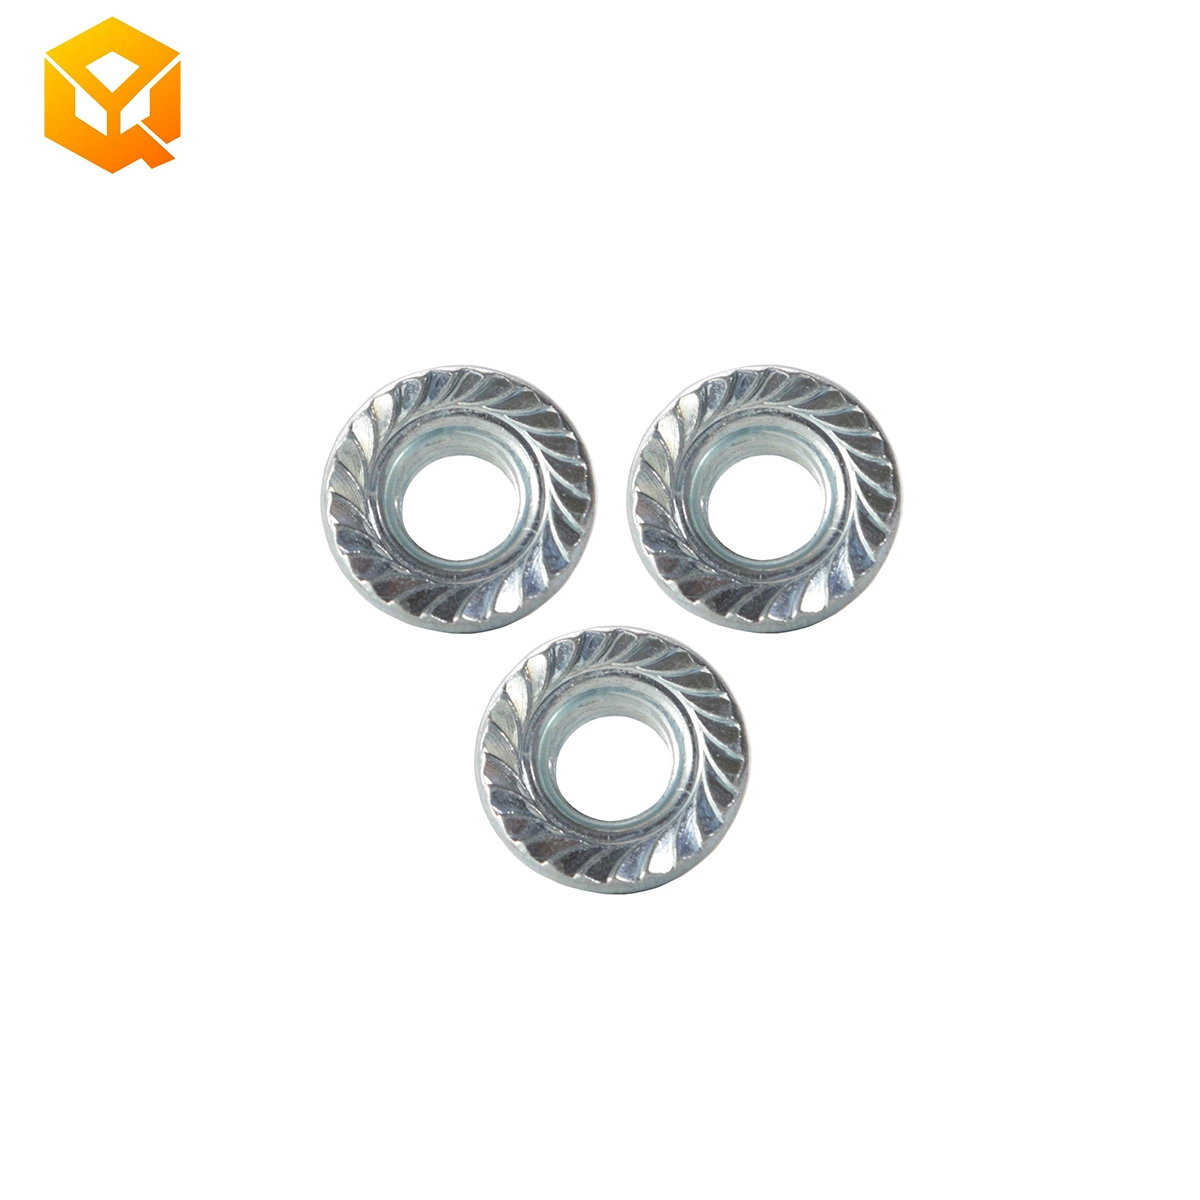 DIN6923 Low Price High quality/High cost performance  Carbon Steel Hexagon Flange Nut Galvanized 4.8 8.8 Hex Flange Nuts